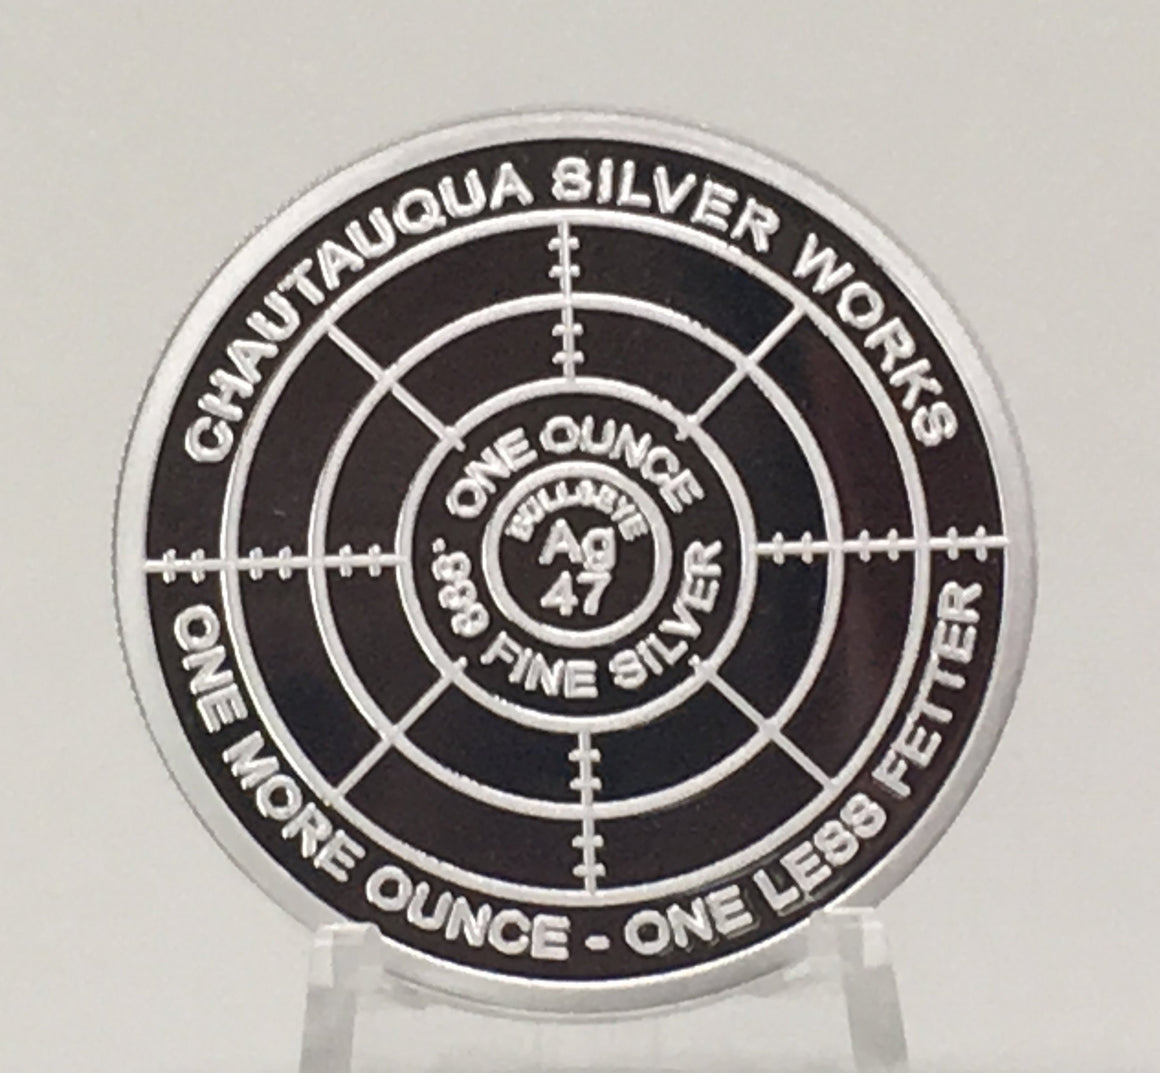 Ounce of Prevention - Curative by Chautauqua Silver Works, 1oz .999 Fine Silver Round